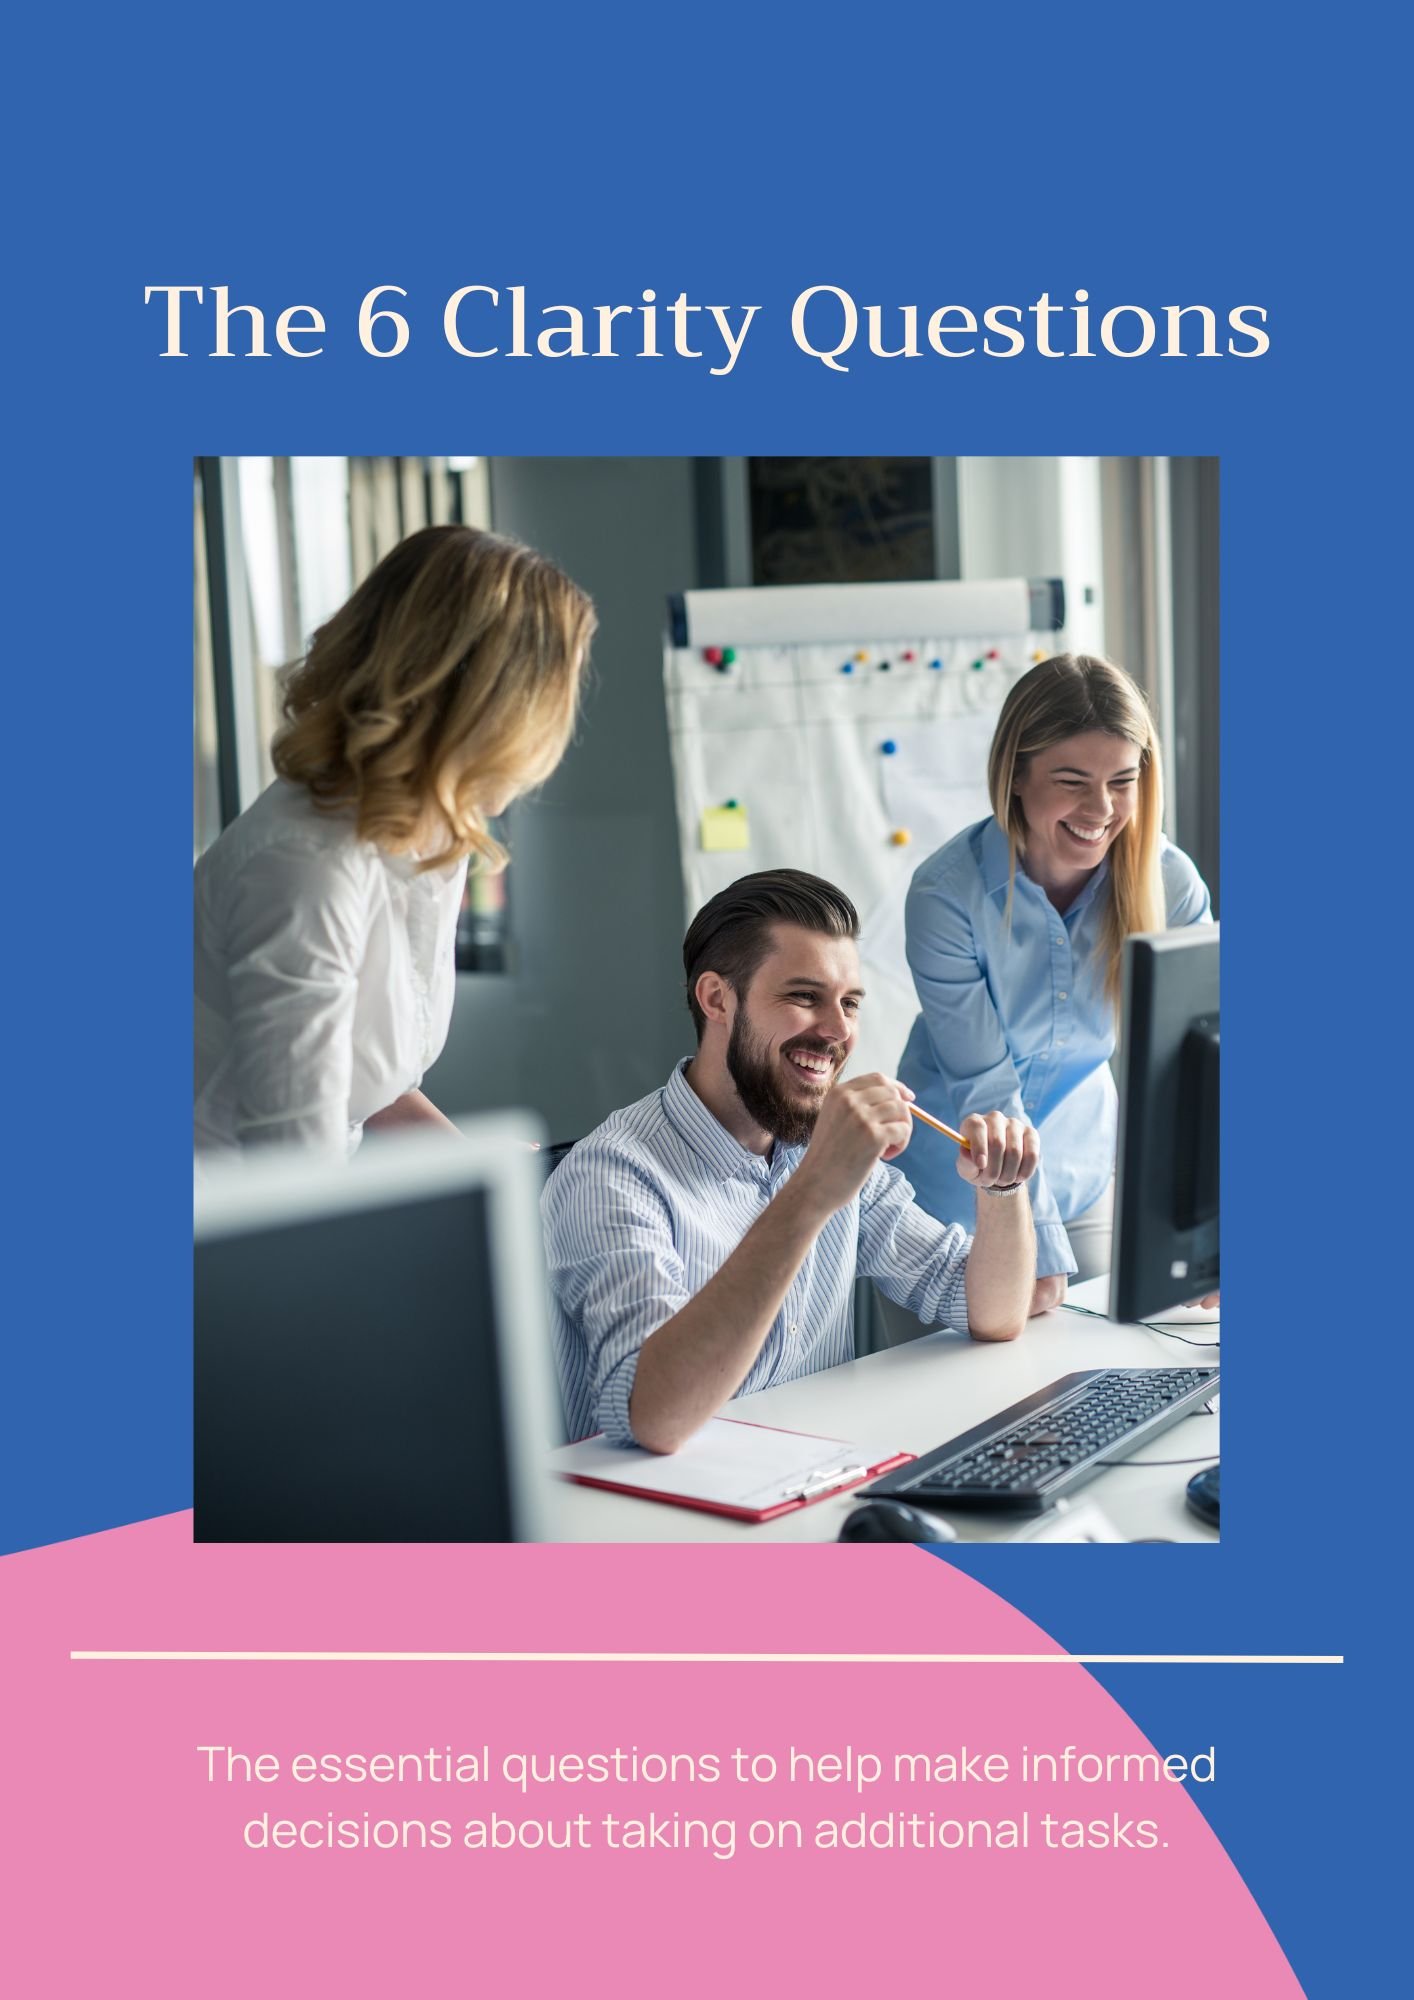 The 6 Clarity Questions Guide